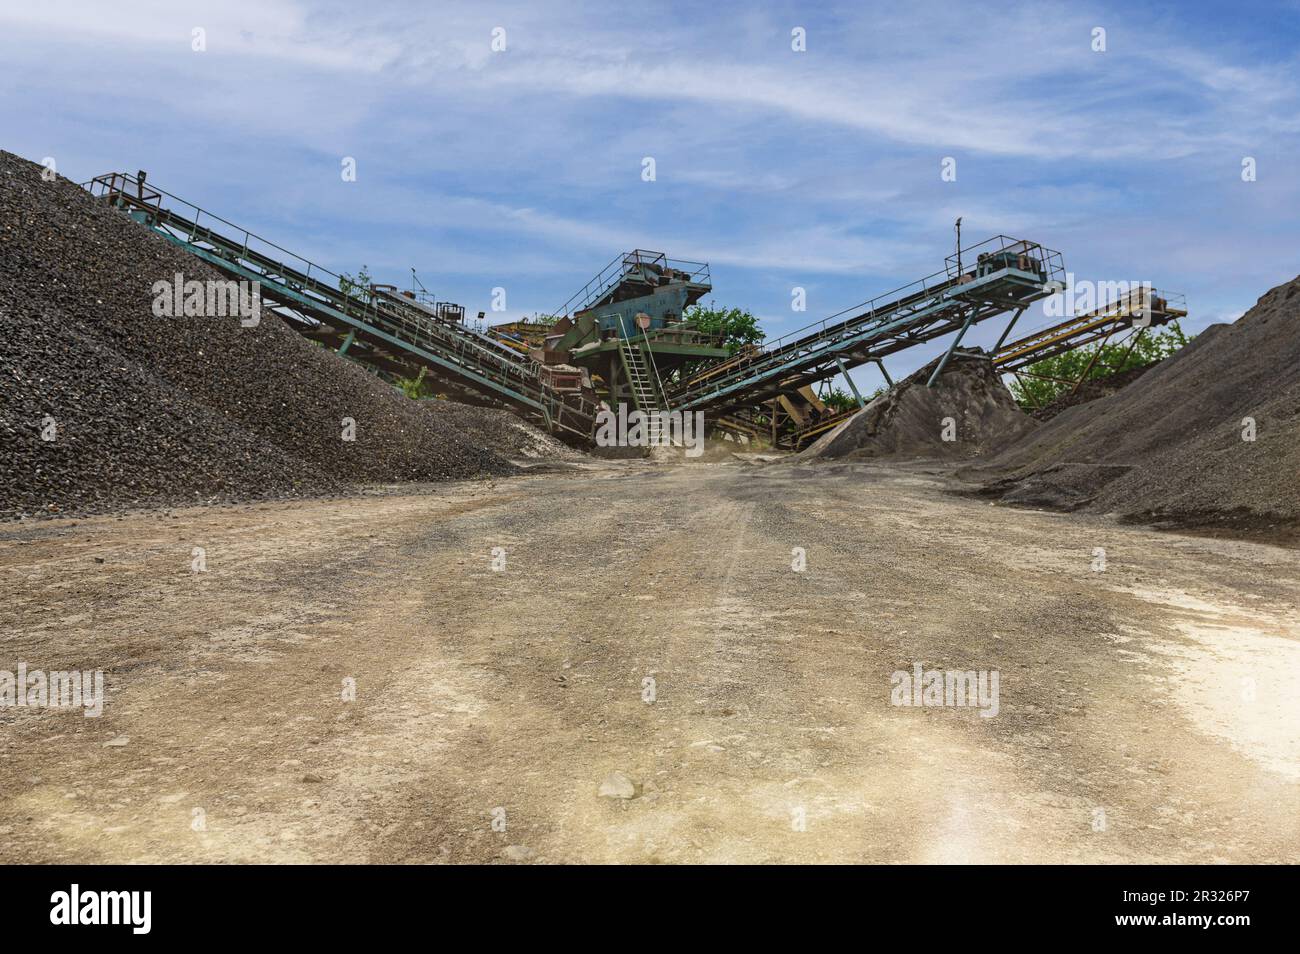 https://c8.alamy.com/comp/2R326P7/crushing-machinery-cone-type-rock-crusher-conveying-crushed-granite-gravel-stone-in-a-quarry-open-pit-mining-minning-industry-gravel-quarry-convey-2R326P7.jpg